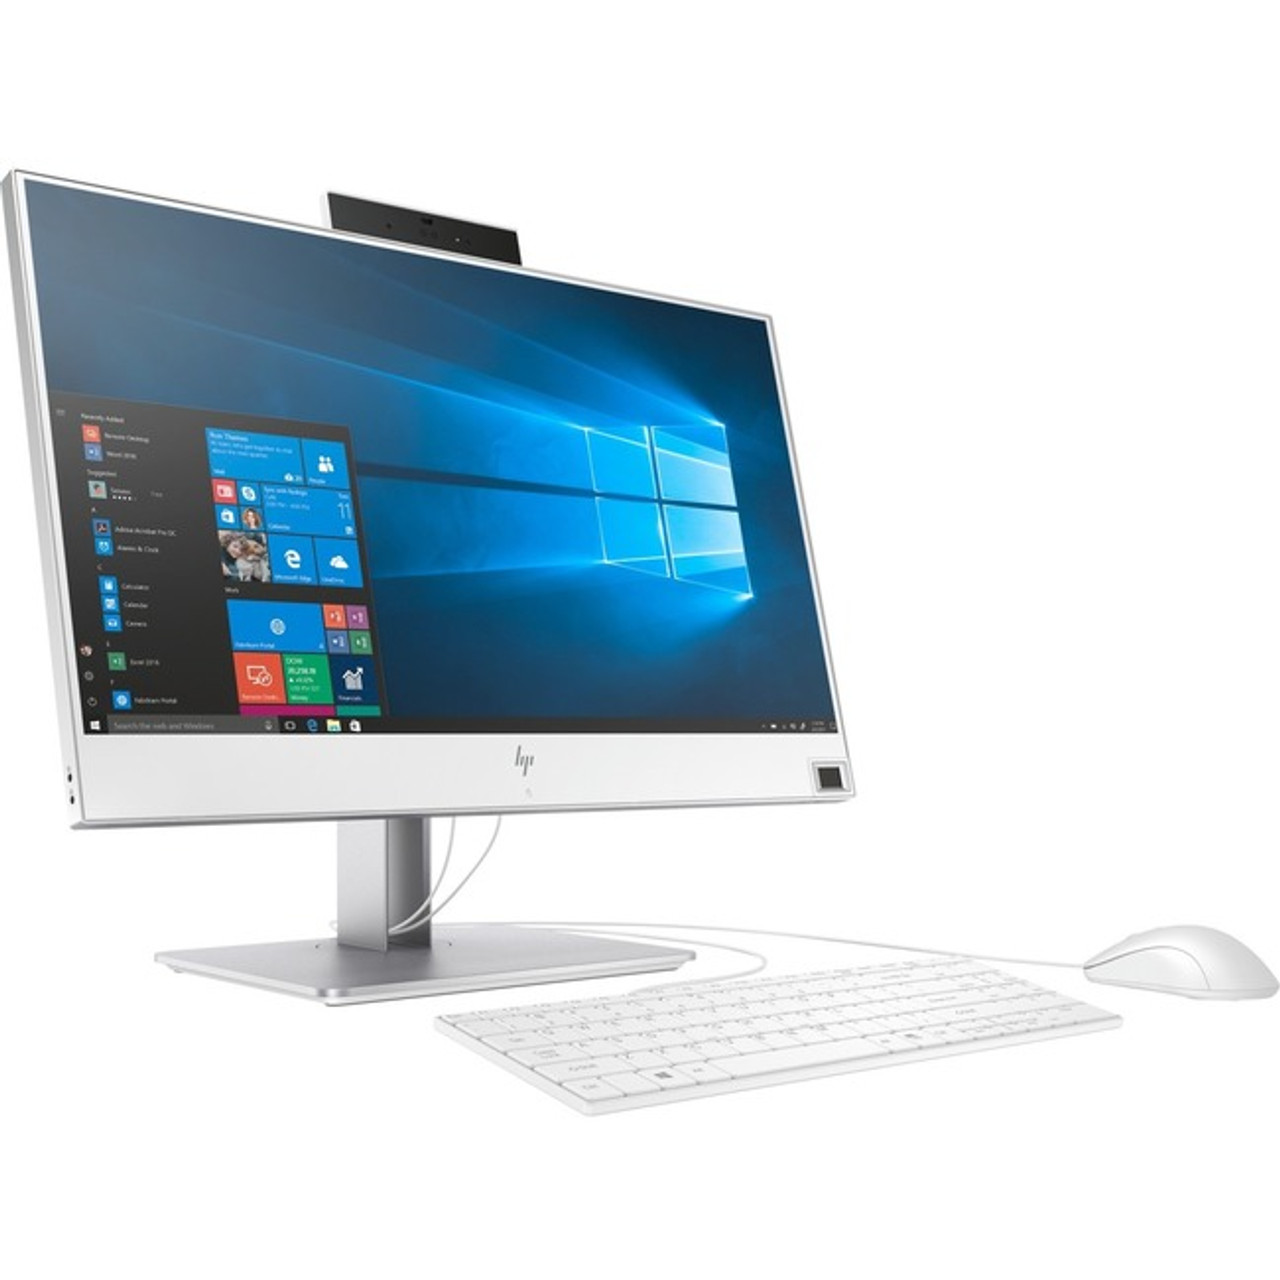 EliteOne 800 G4 23.8-inch Non-Touch GPU All-in-One PC